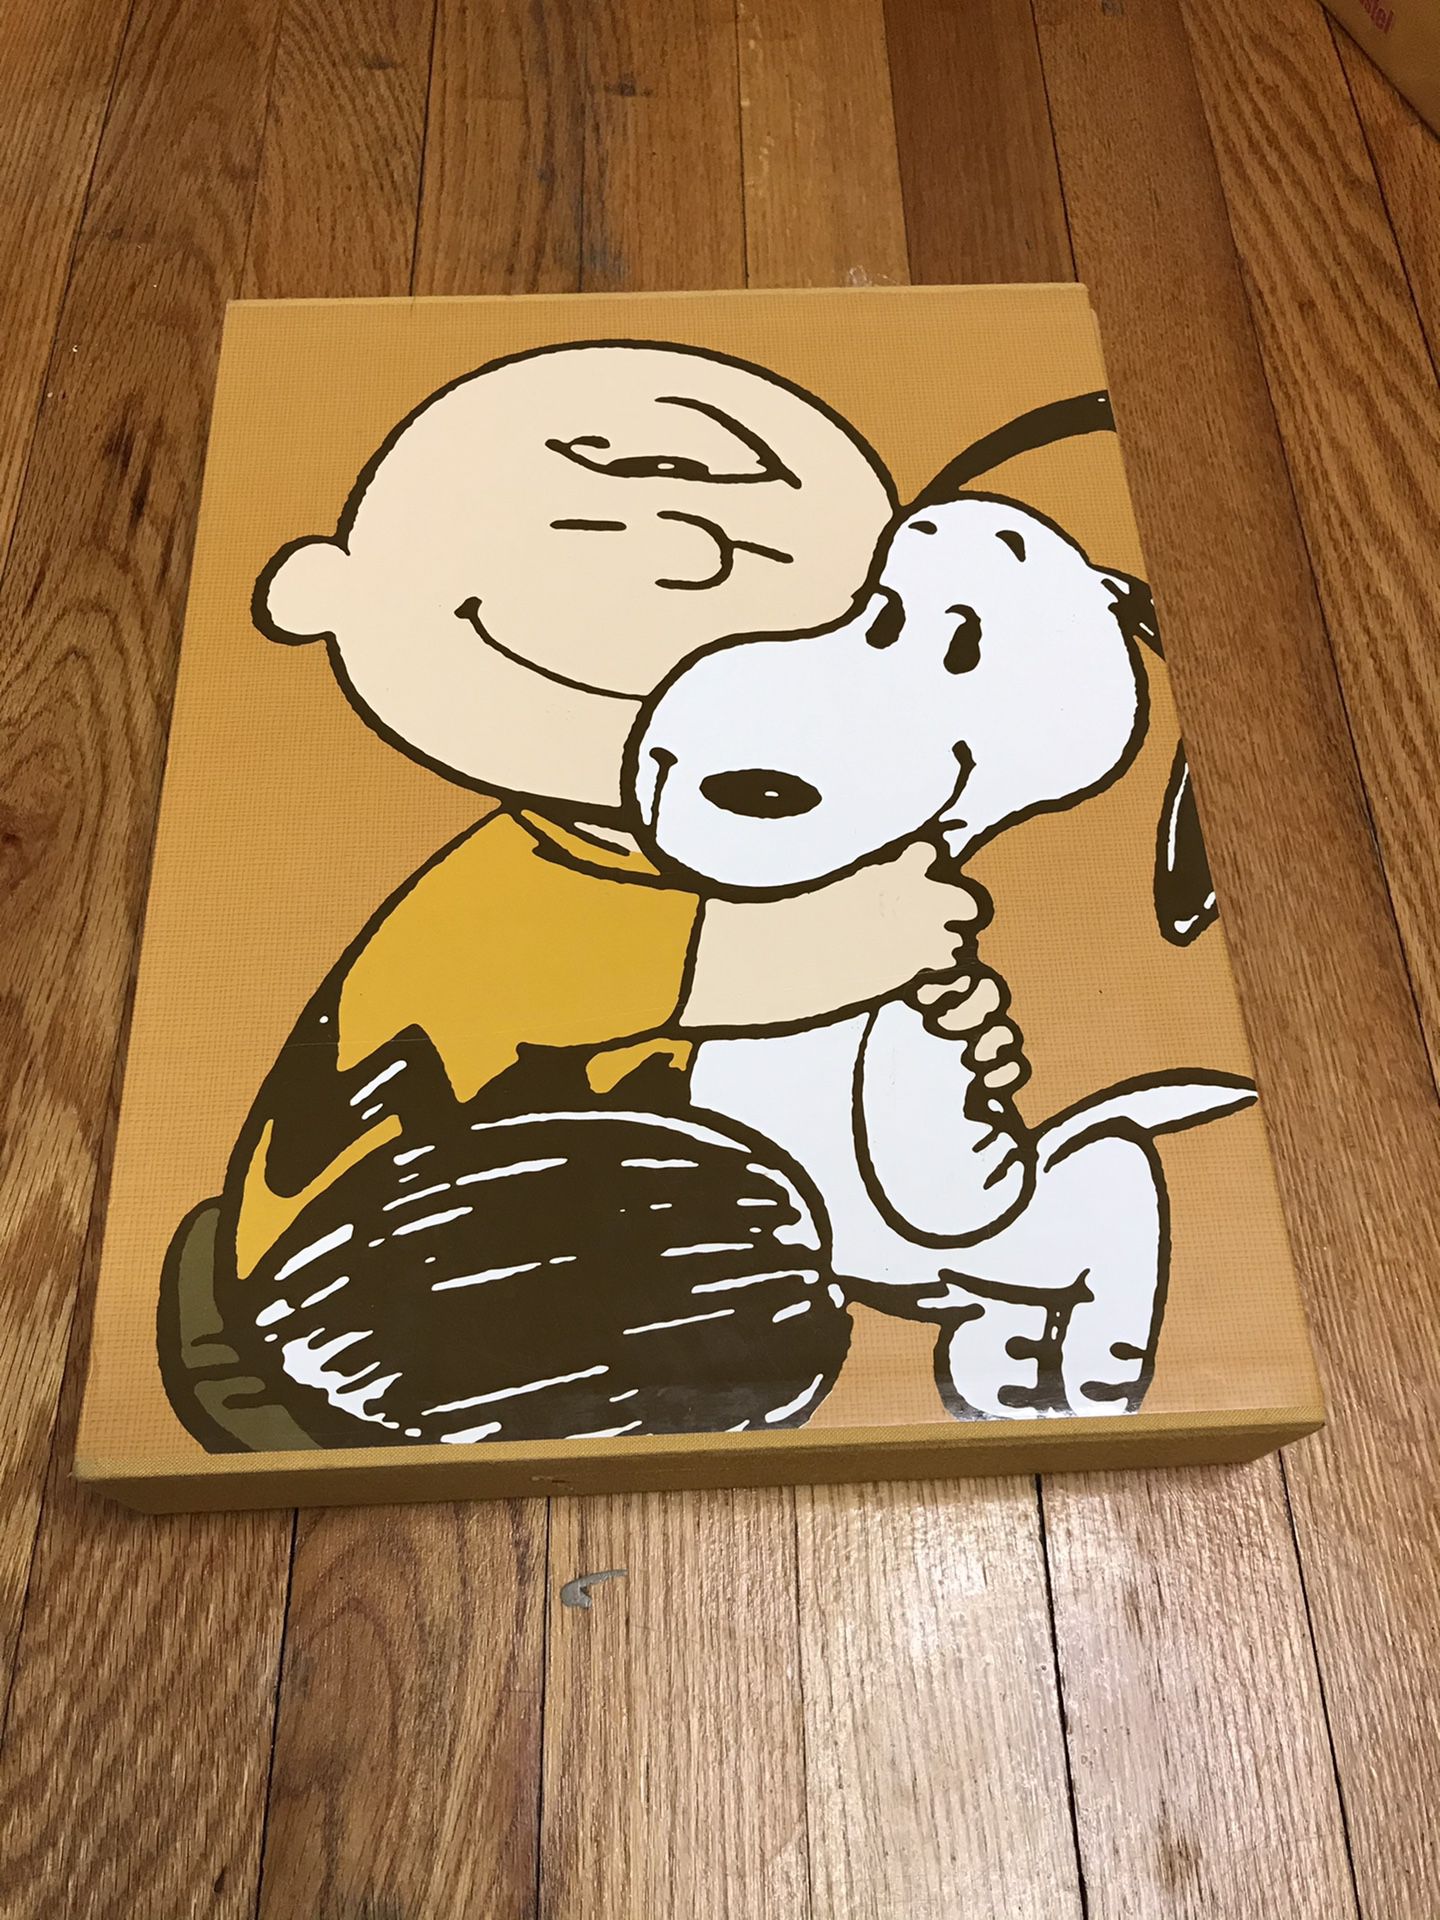 Celebrating Peanuts : 60 Years by Charles Schulz (2009, Hardcover, Anniversary) New MSRP $120